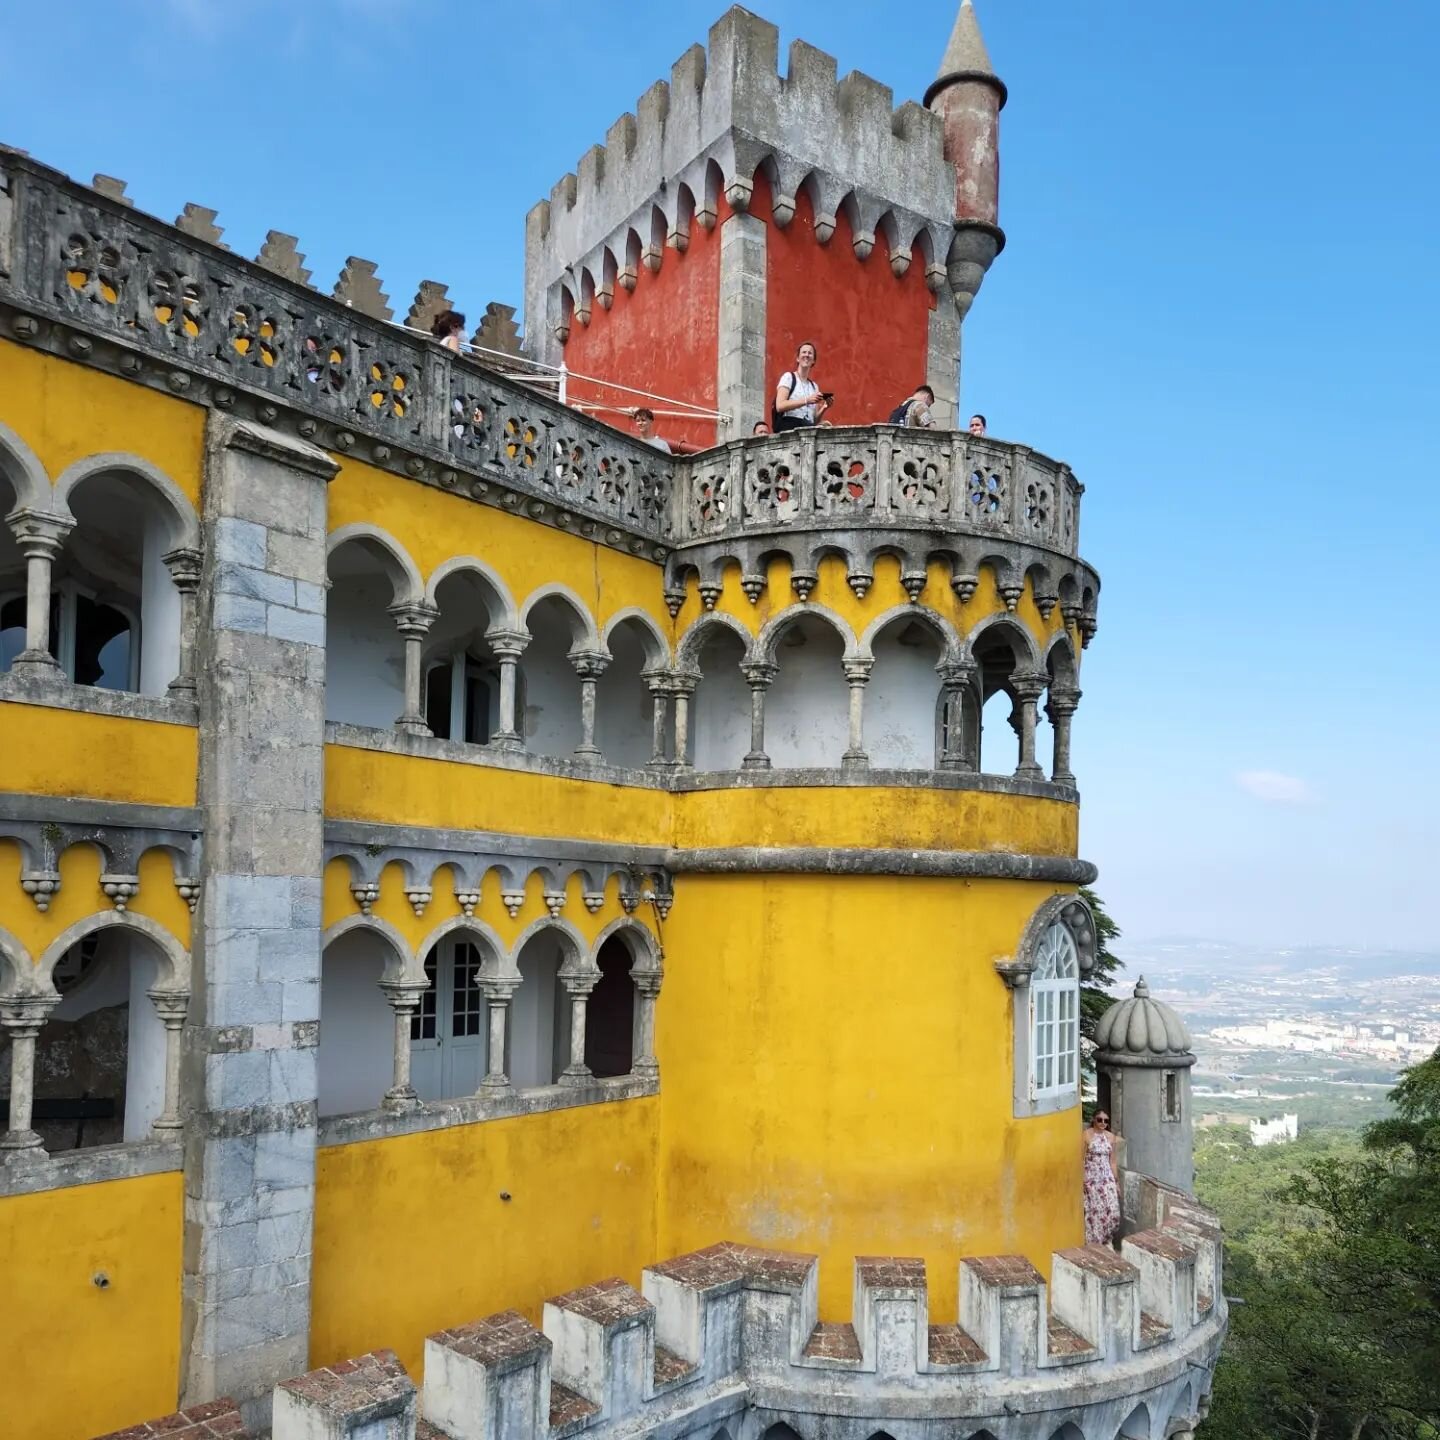 The whimsical Pena Palace and Moorish Castle. Breathtaking and colorful history 🇵🇹